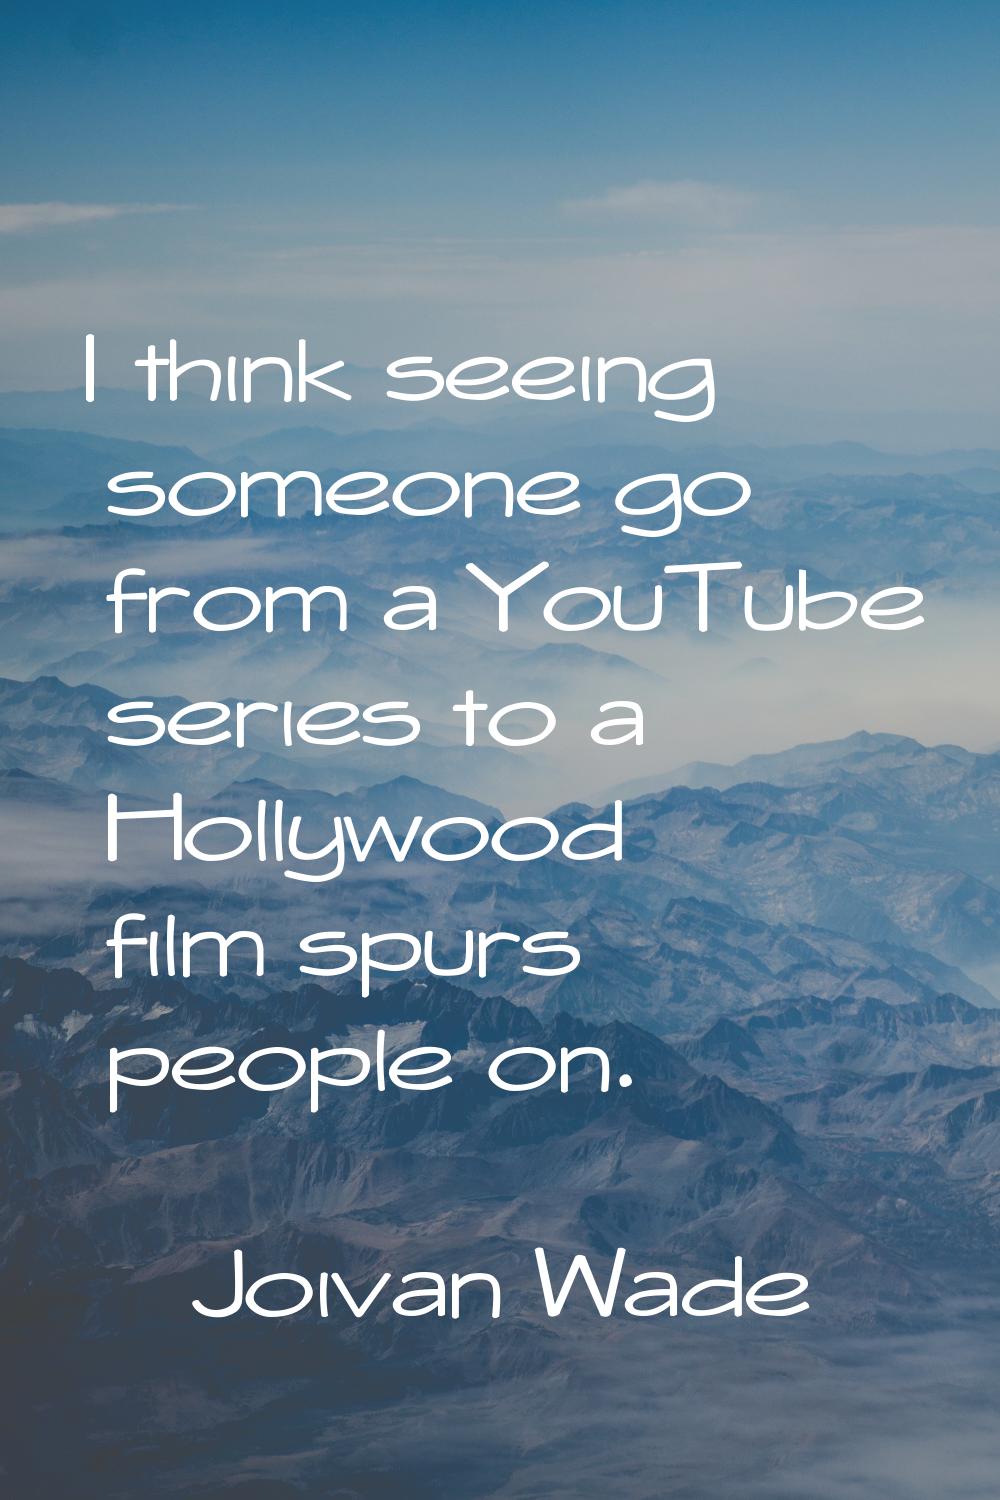 I think seeing someone go from a YouTube series to a Hollywood film spurs people on.